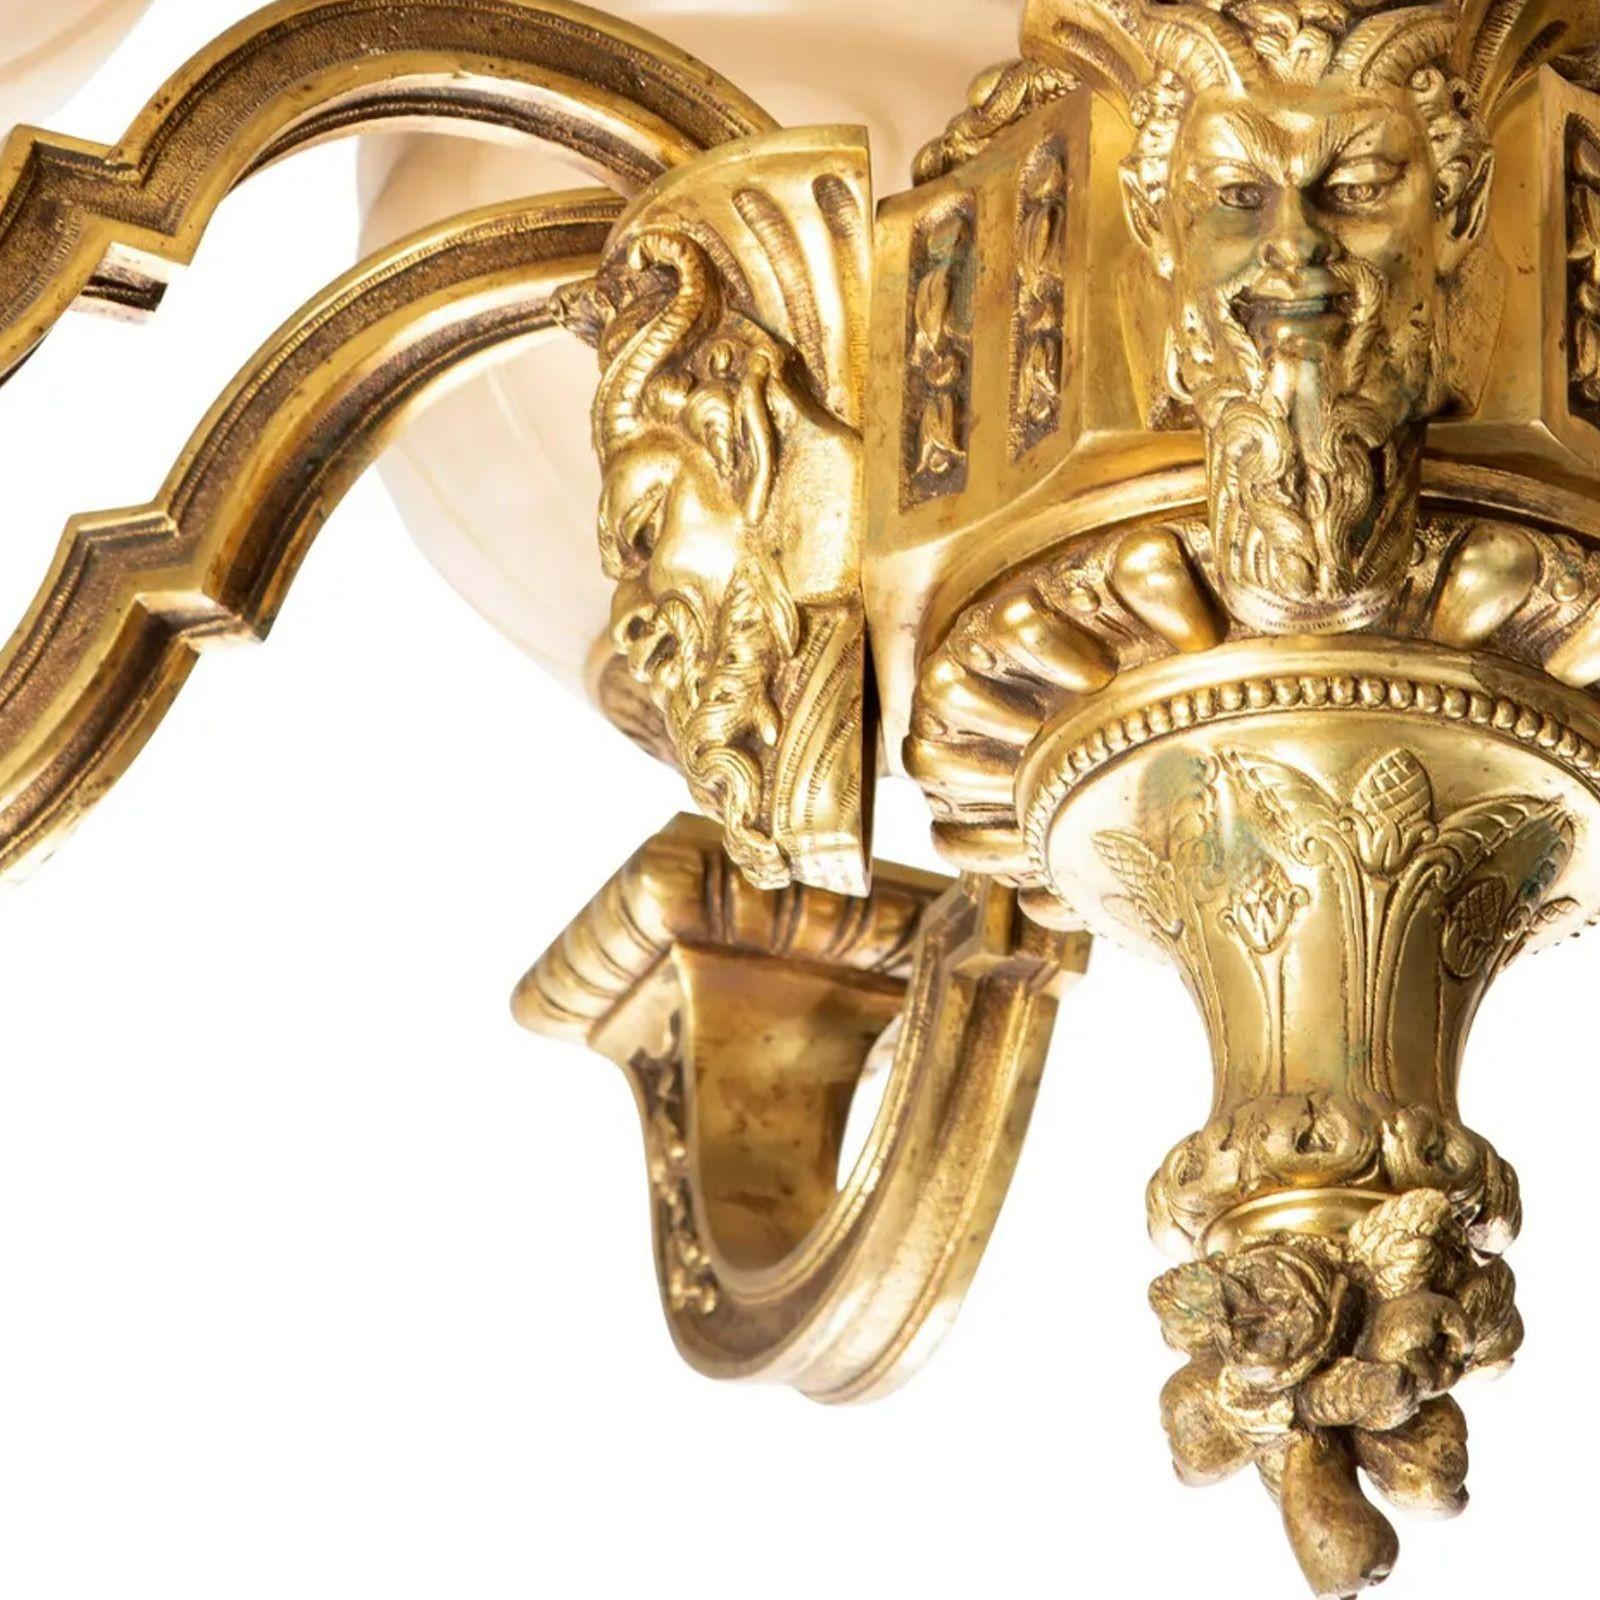 Late 19th century gilt-bronze chandelier.
 
Eight-light gilt bronze chandelier surrounded with arms mounted to a gargoyle mask and with eight carved alabaster/marble shades, electrified.
33.5